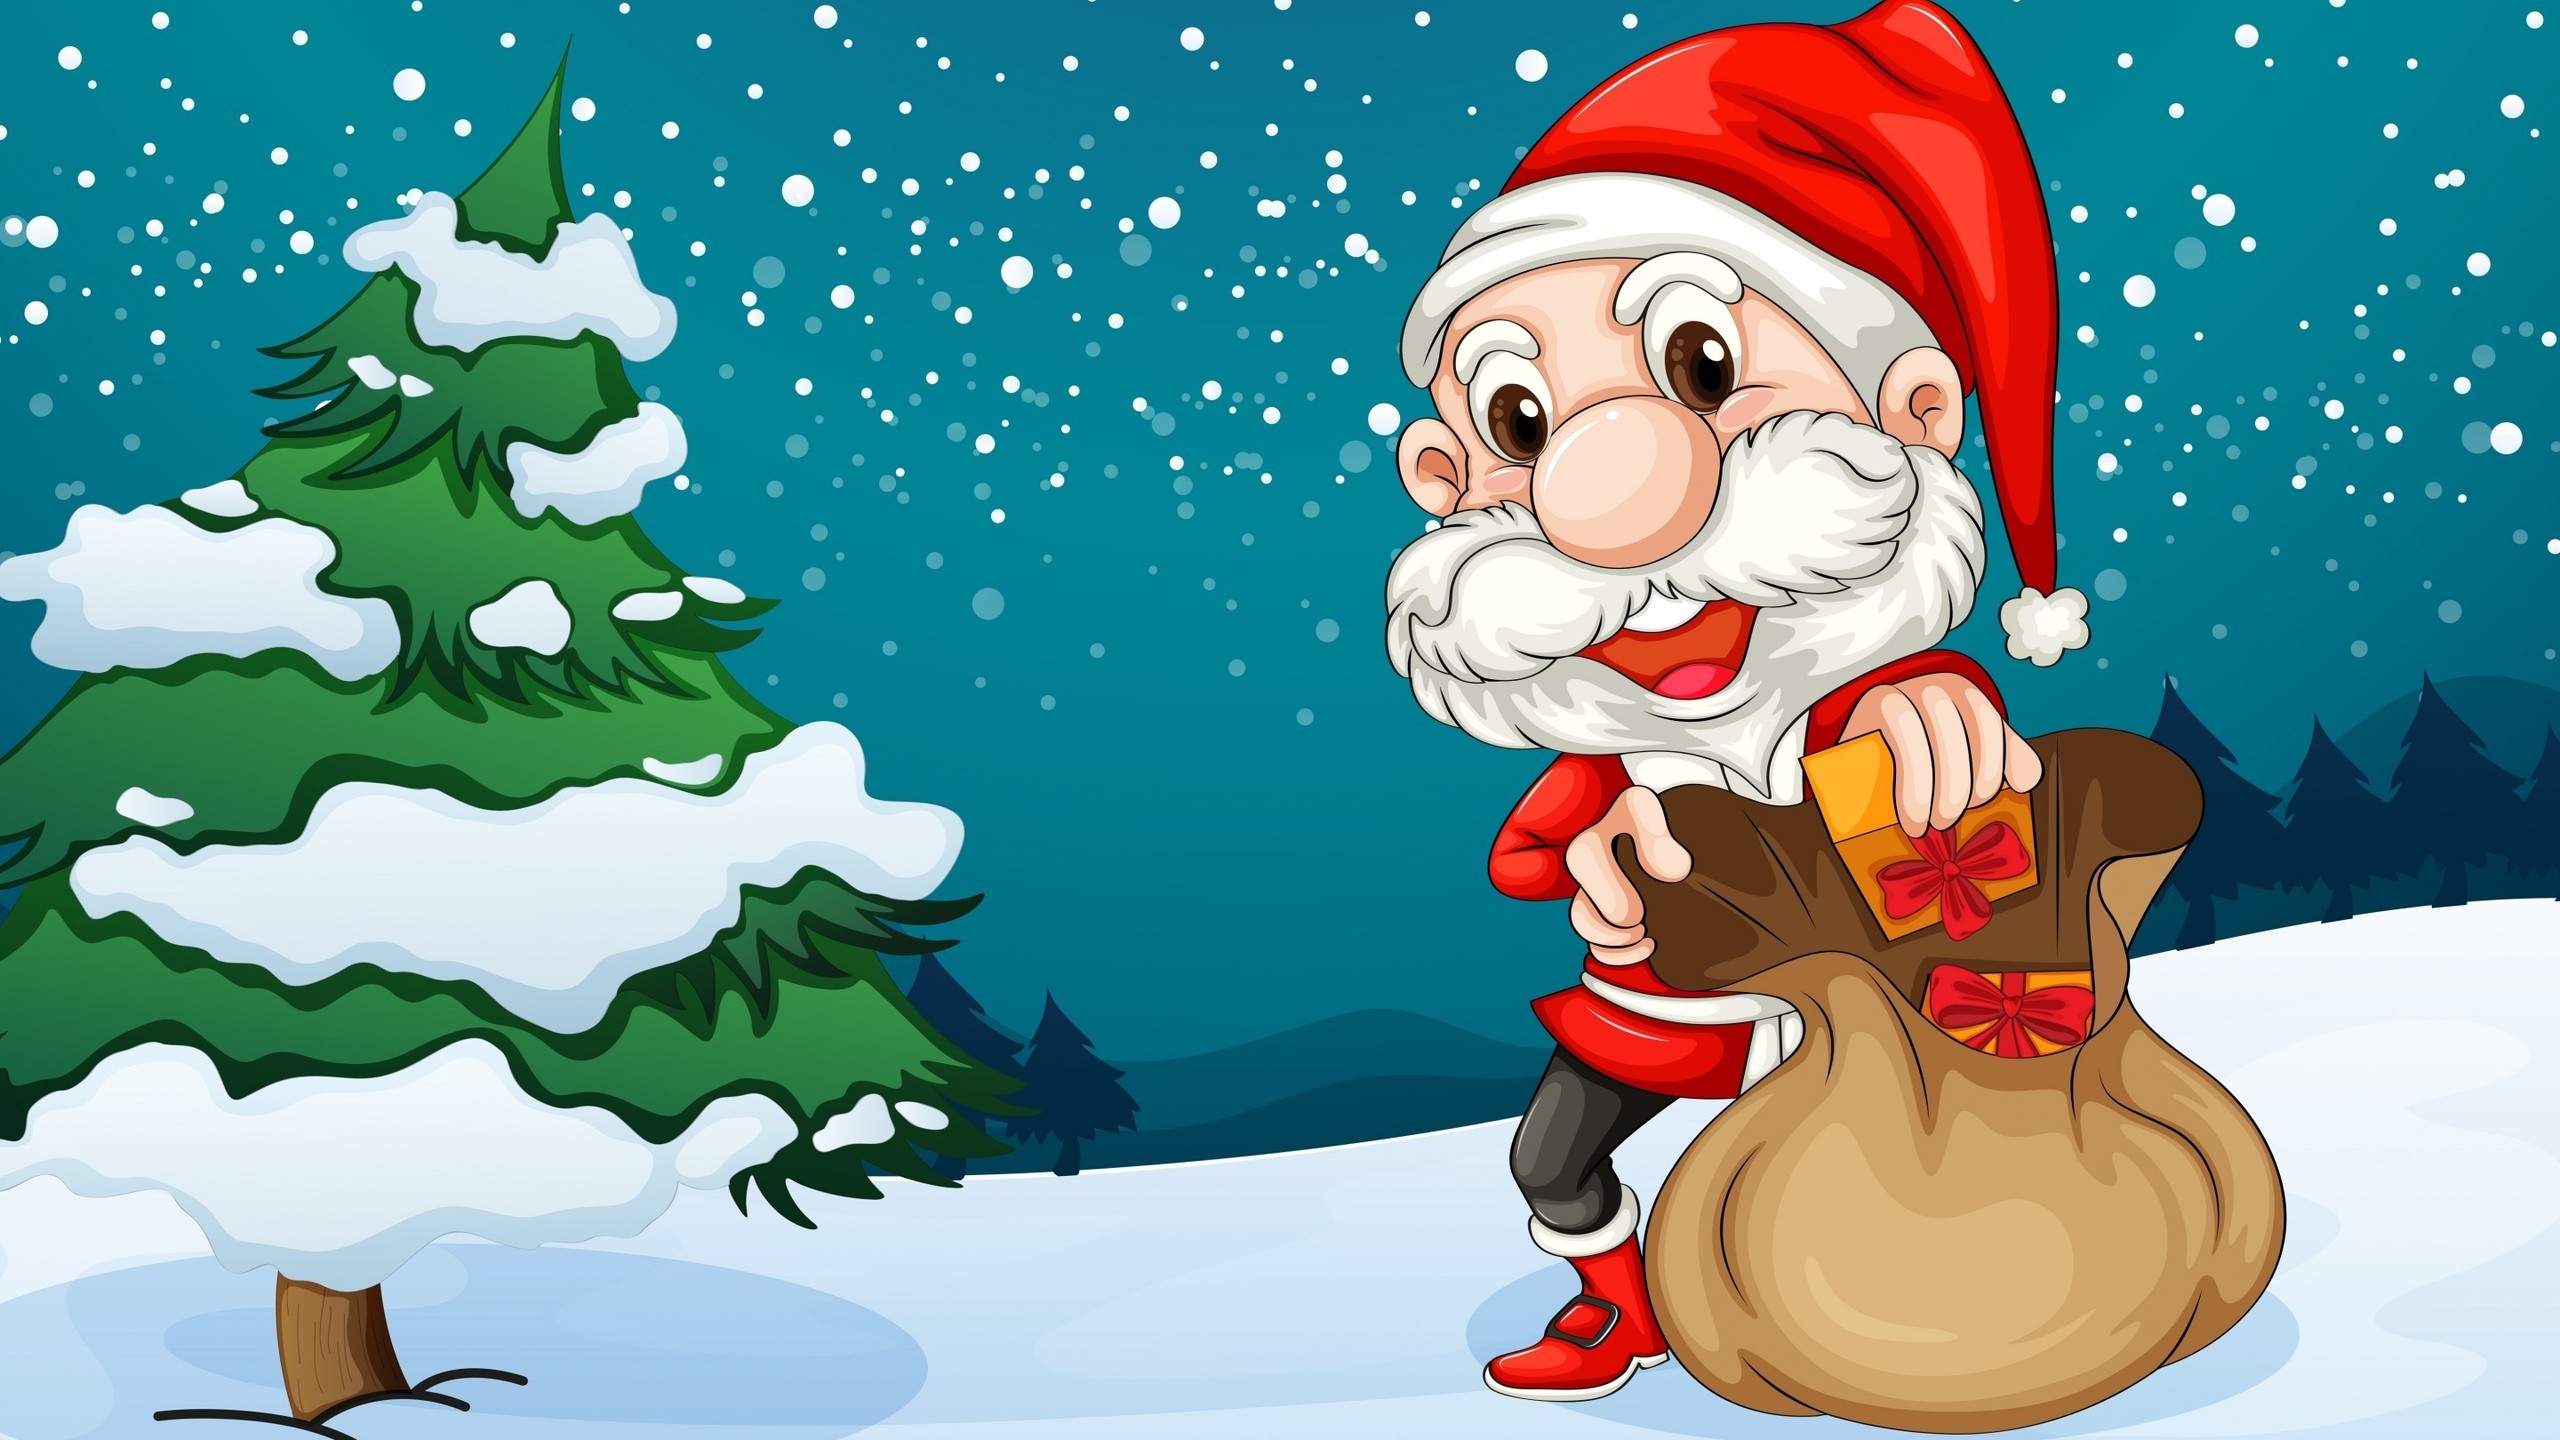 The Happiest Santa for 2560x1440 HDTV resolution